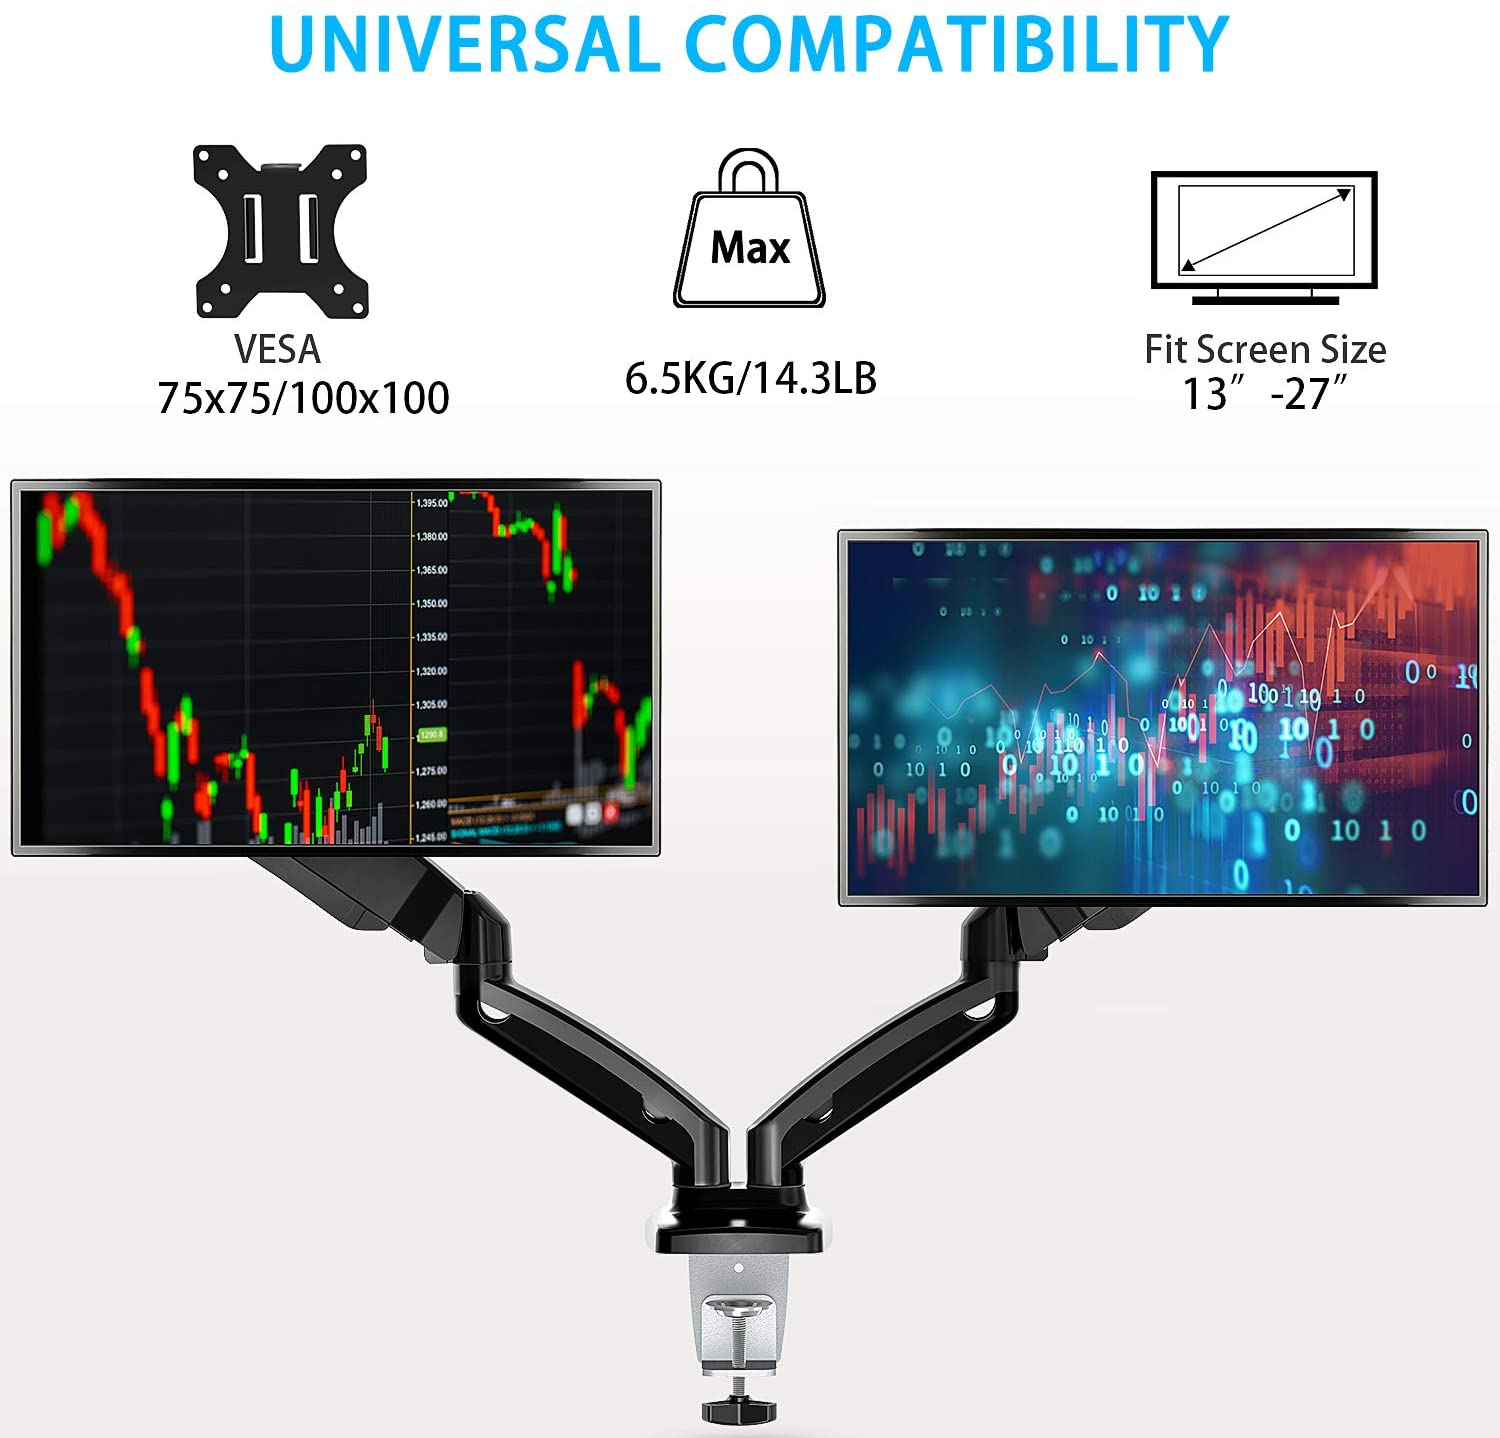 Dual Arms monitor desk holder for 2 13-27'' monitors with vesa 75×75 and 100×100 hole pattern